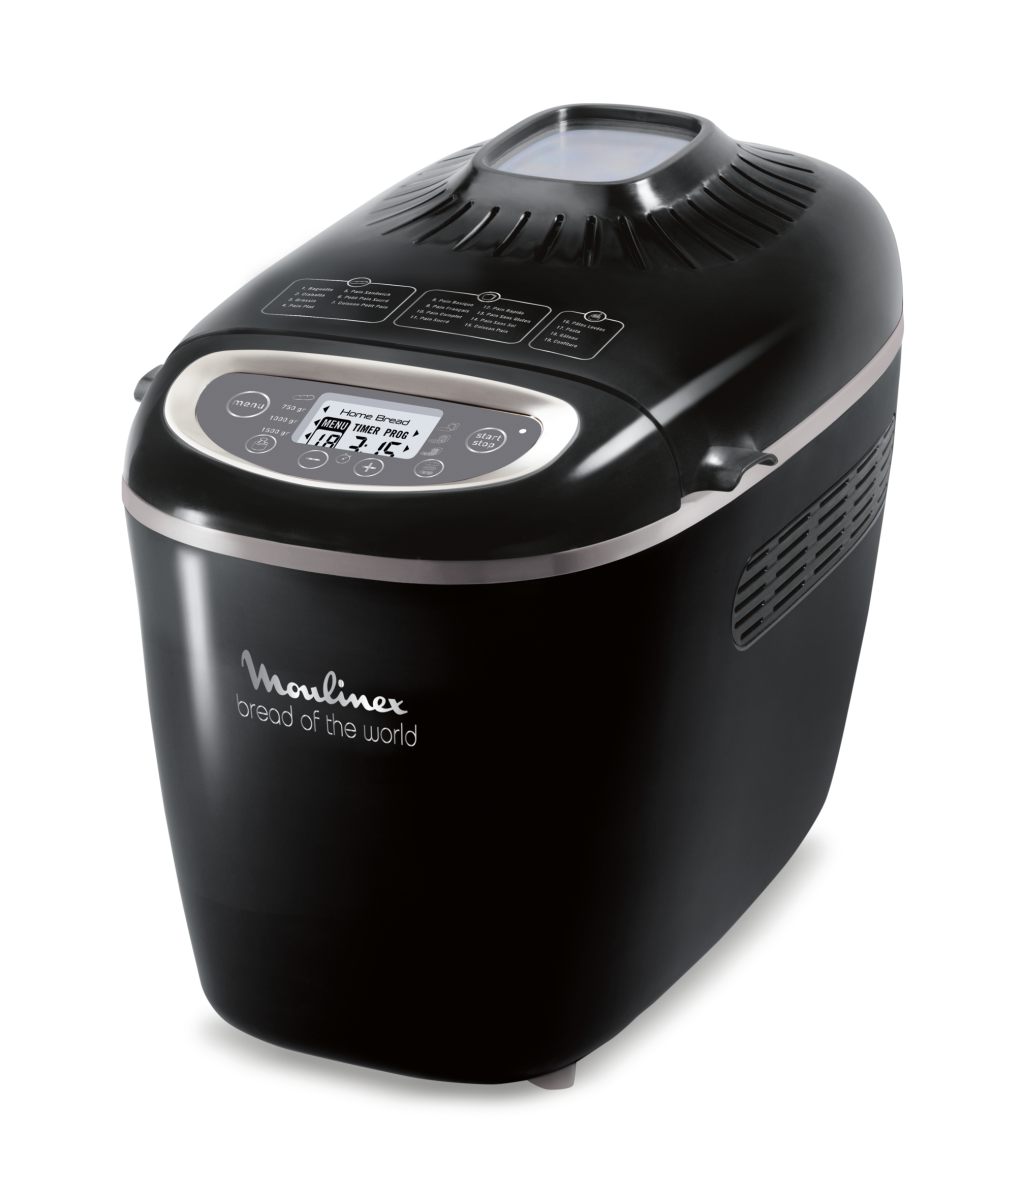 Cuptor de paine Moulinex Bread of the world OW611810, 1650 W, 1.5 kg, 19 programe, Display LCD, Negru